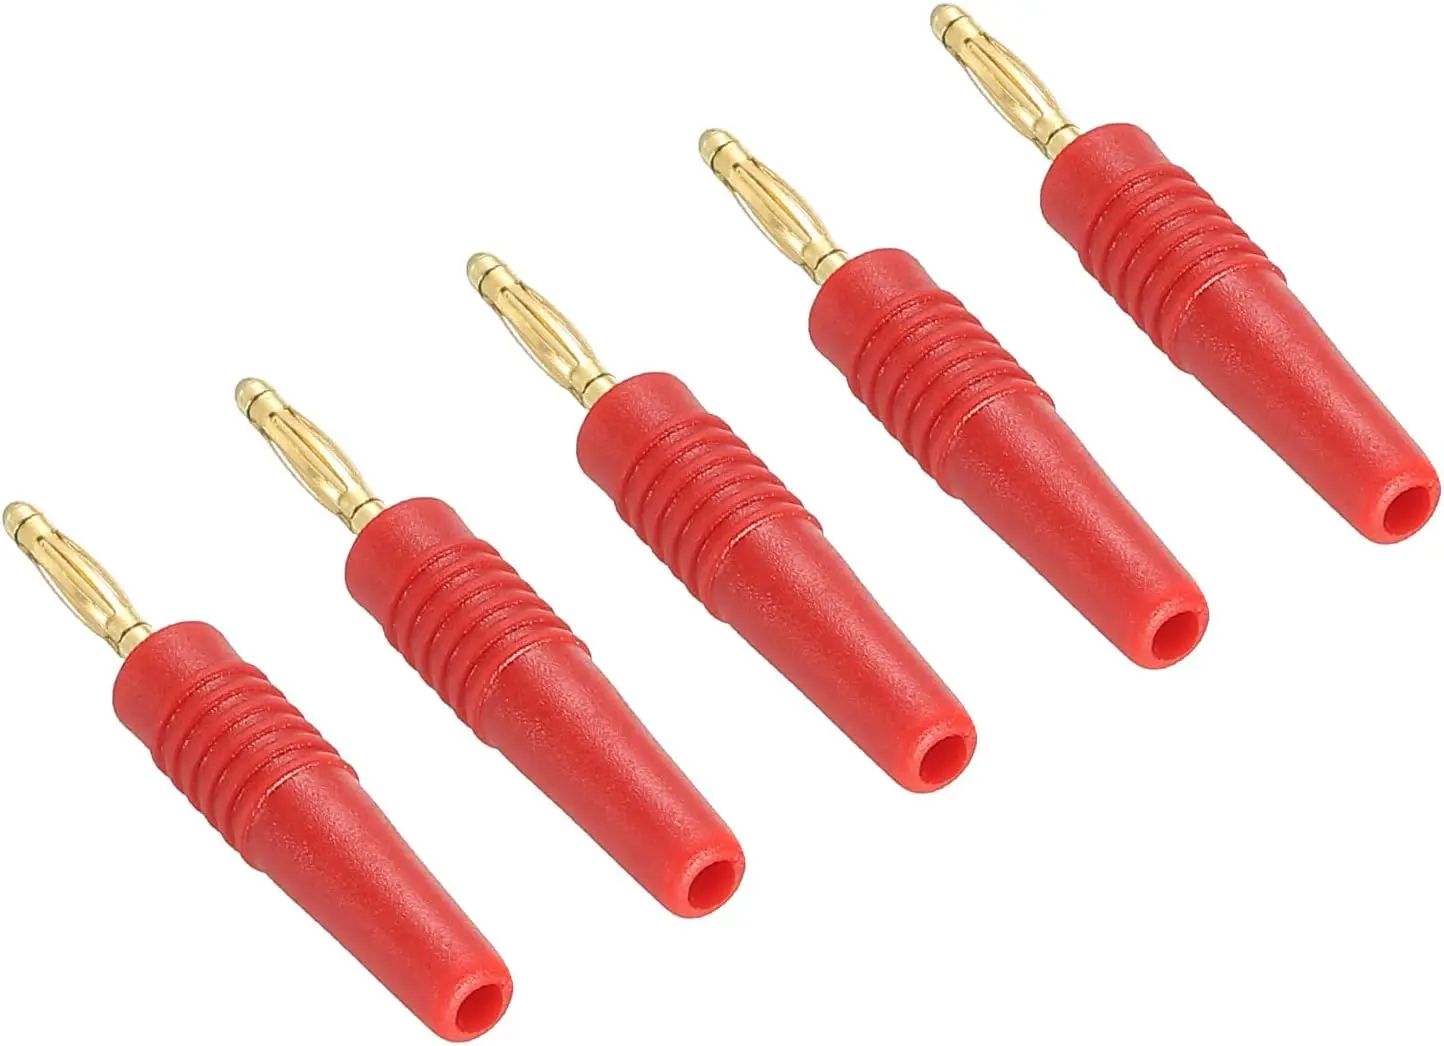 

5 Pack Banana Plugs Connector Solder Type Speaker Banana Plugs 2mm Gold-Plated Copper Red for Speaker Wires,